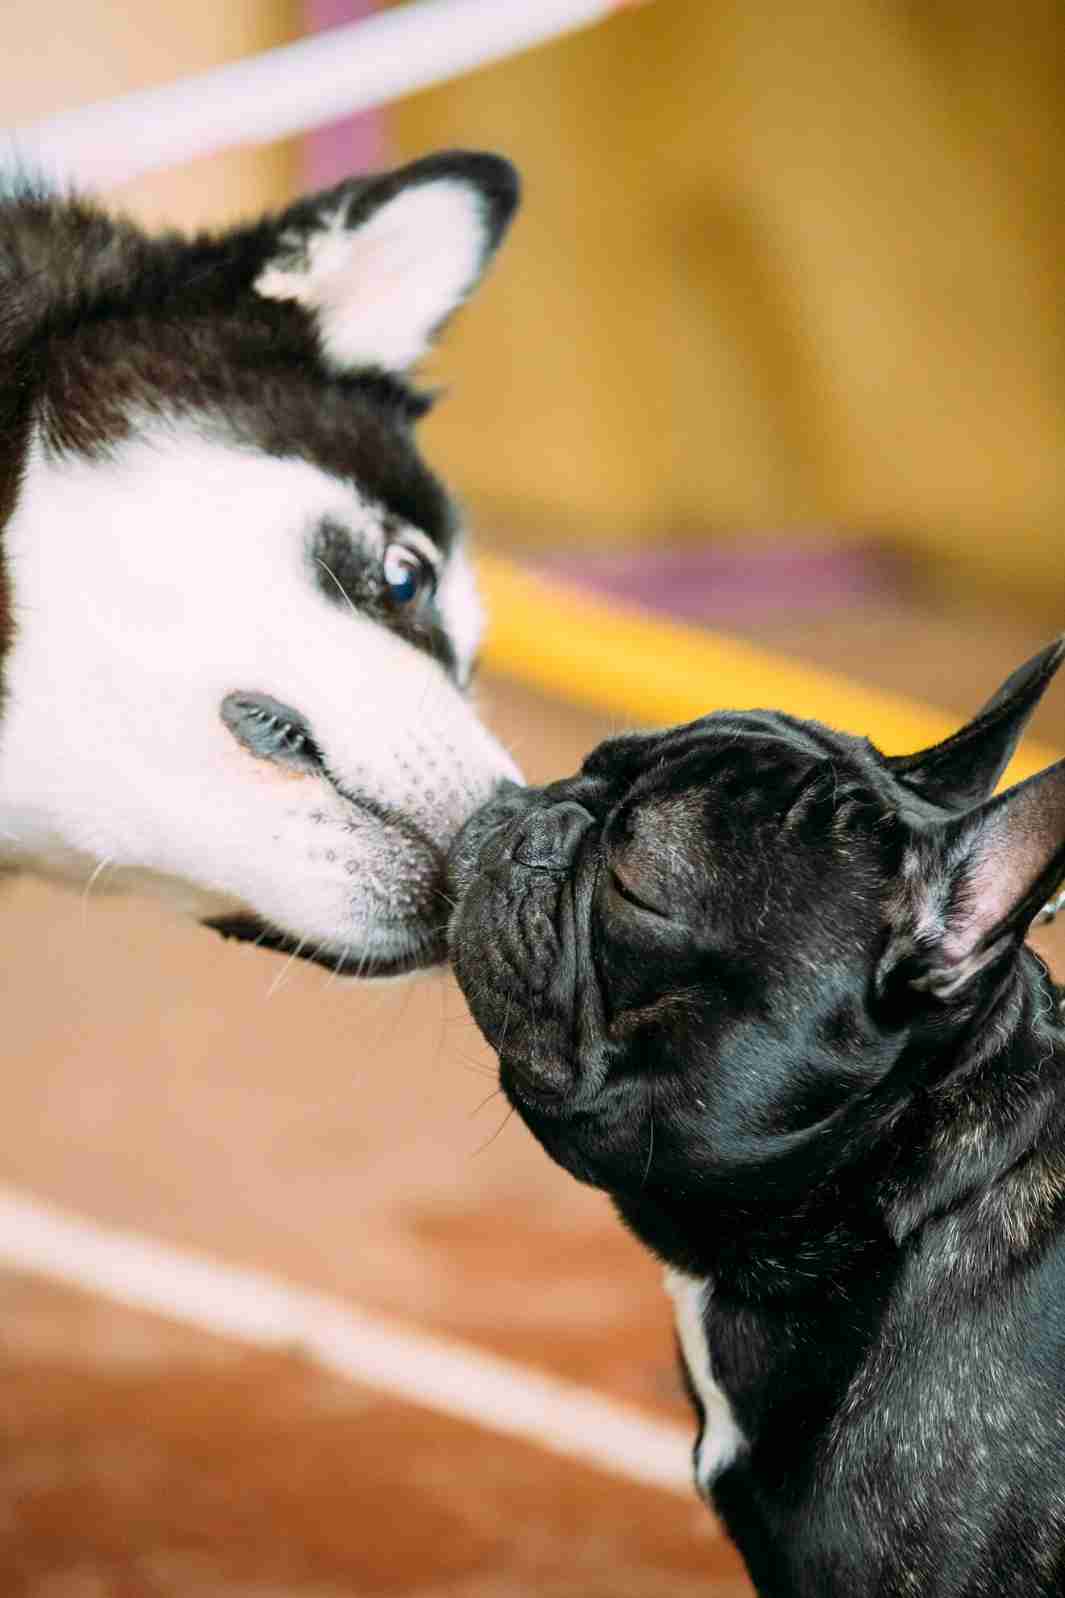 Discover 9 Most Popular Dog Breeds of 2021. Adorable large Husky and small French Bulldog kissing each other.